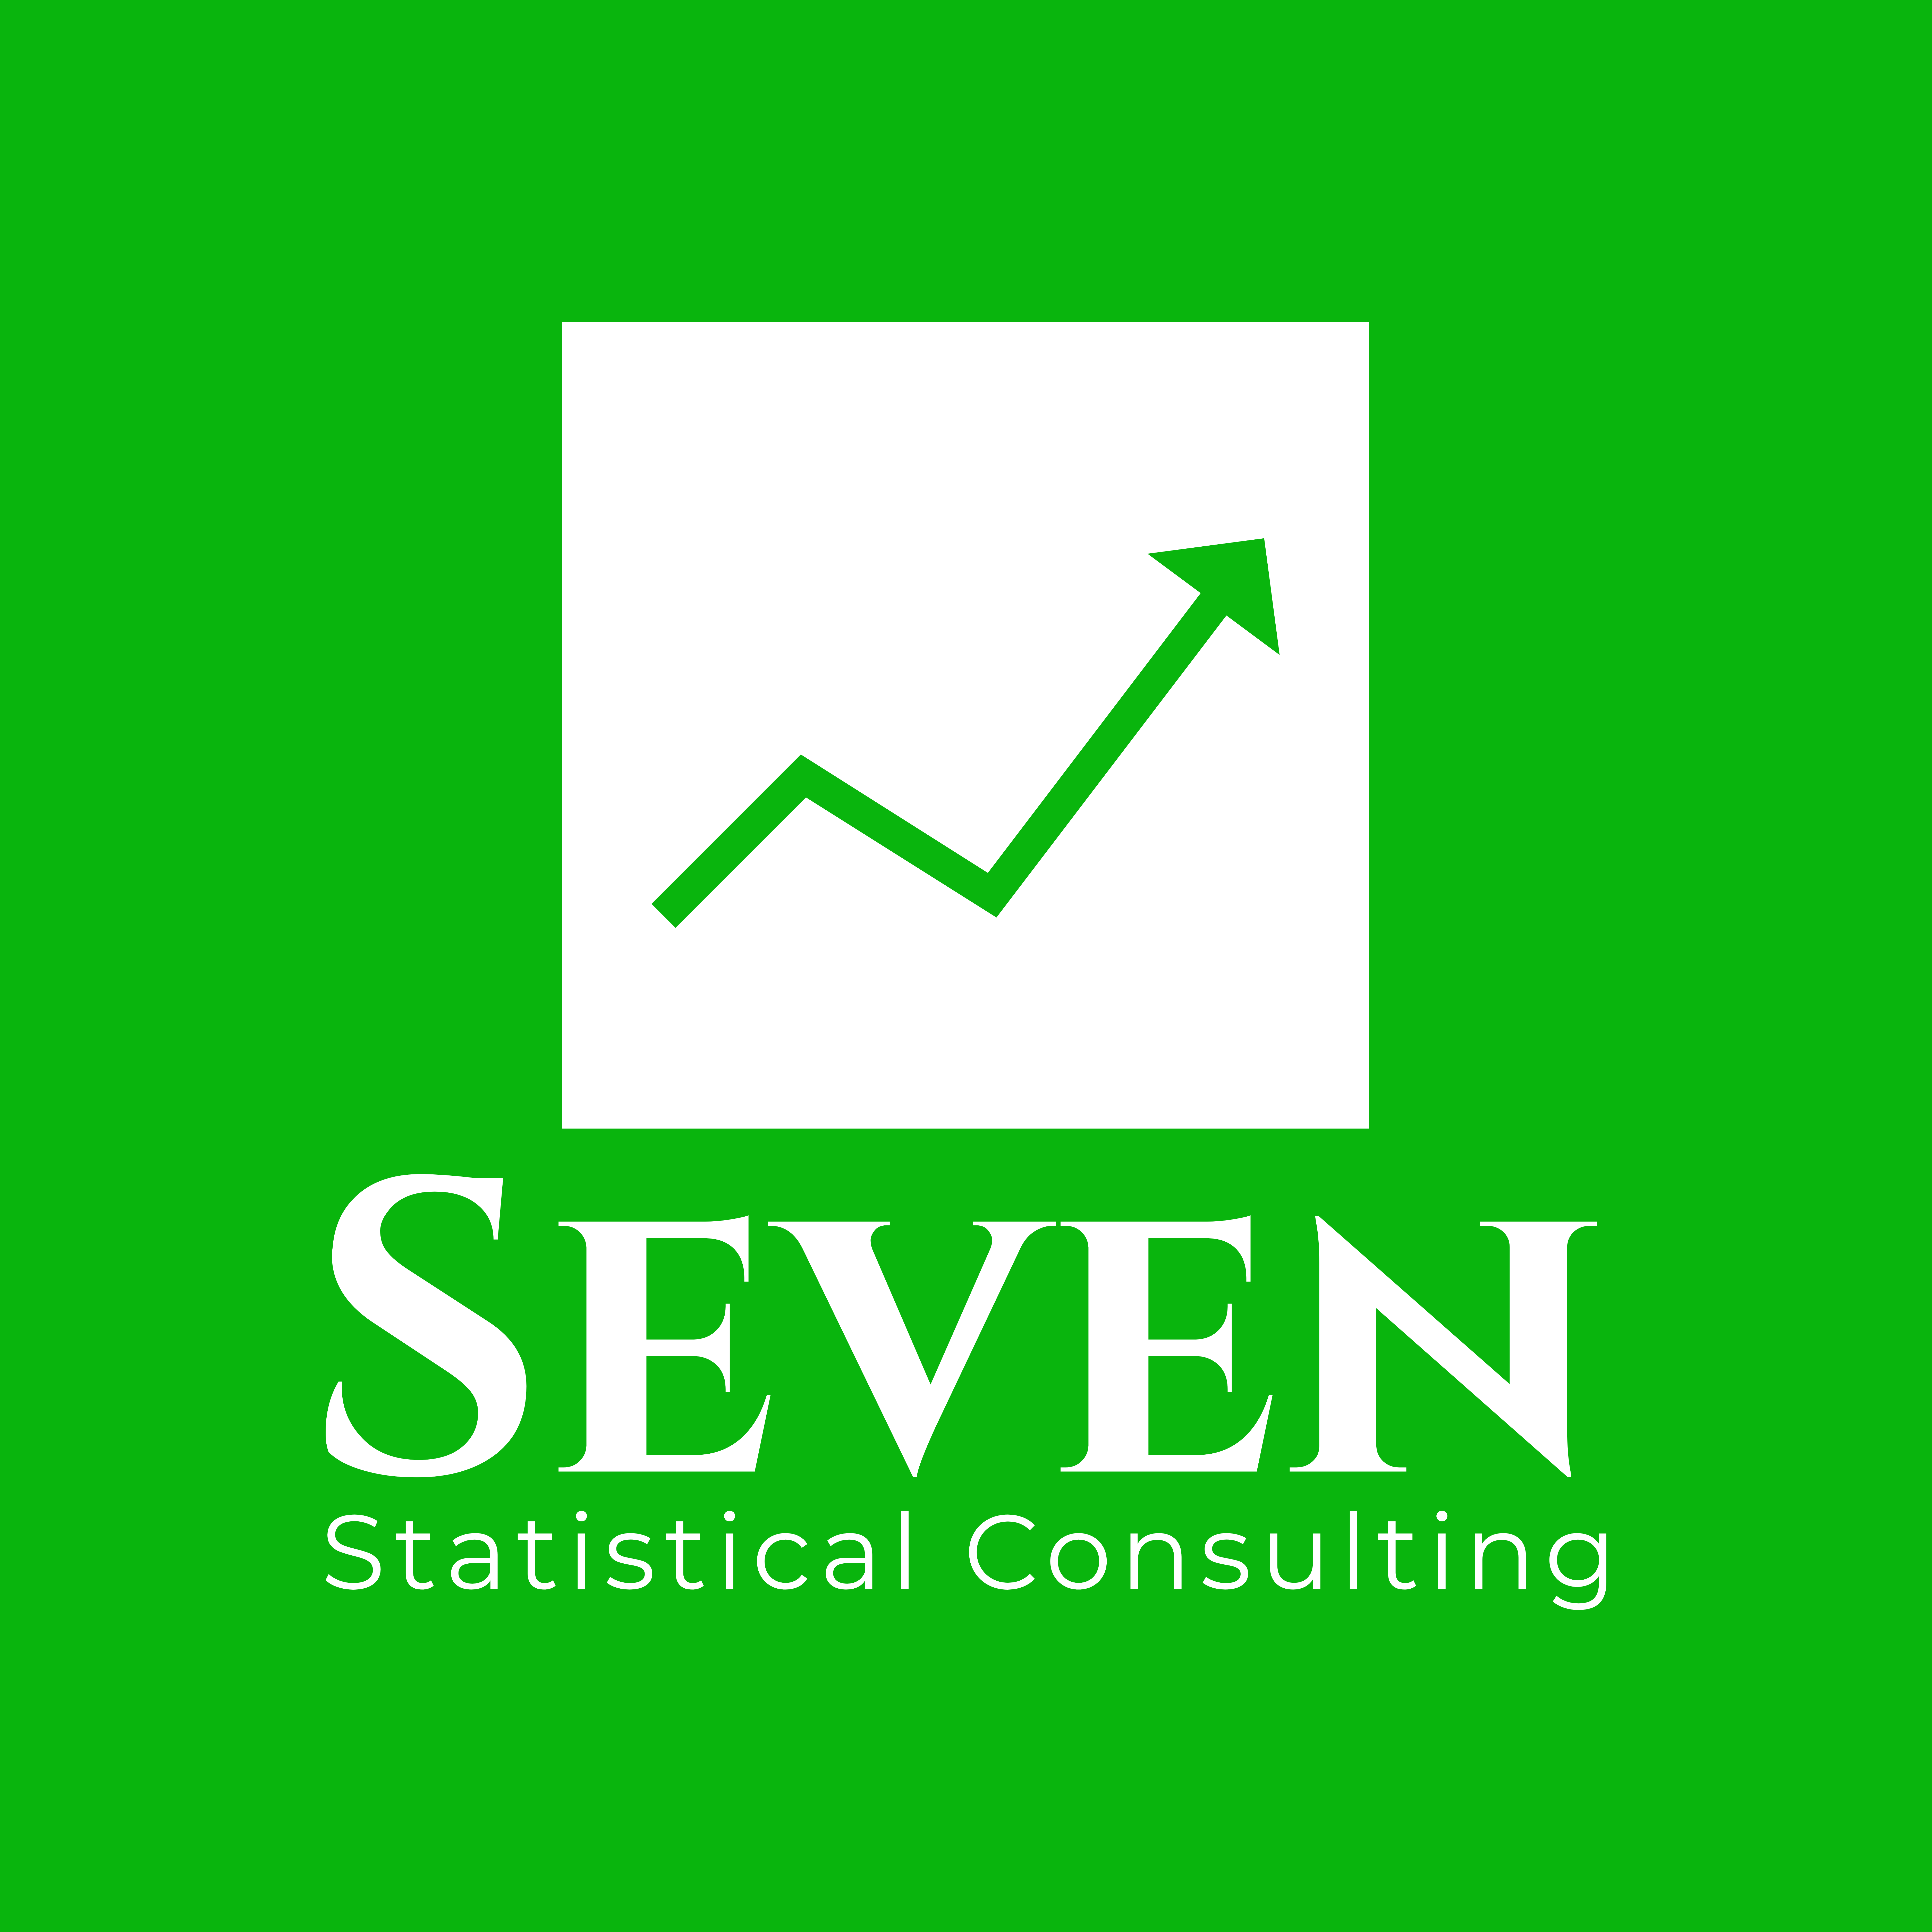 Seven Statistical Consulting